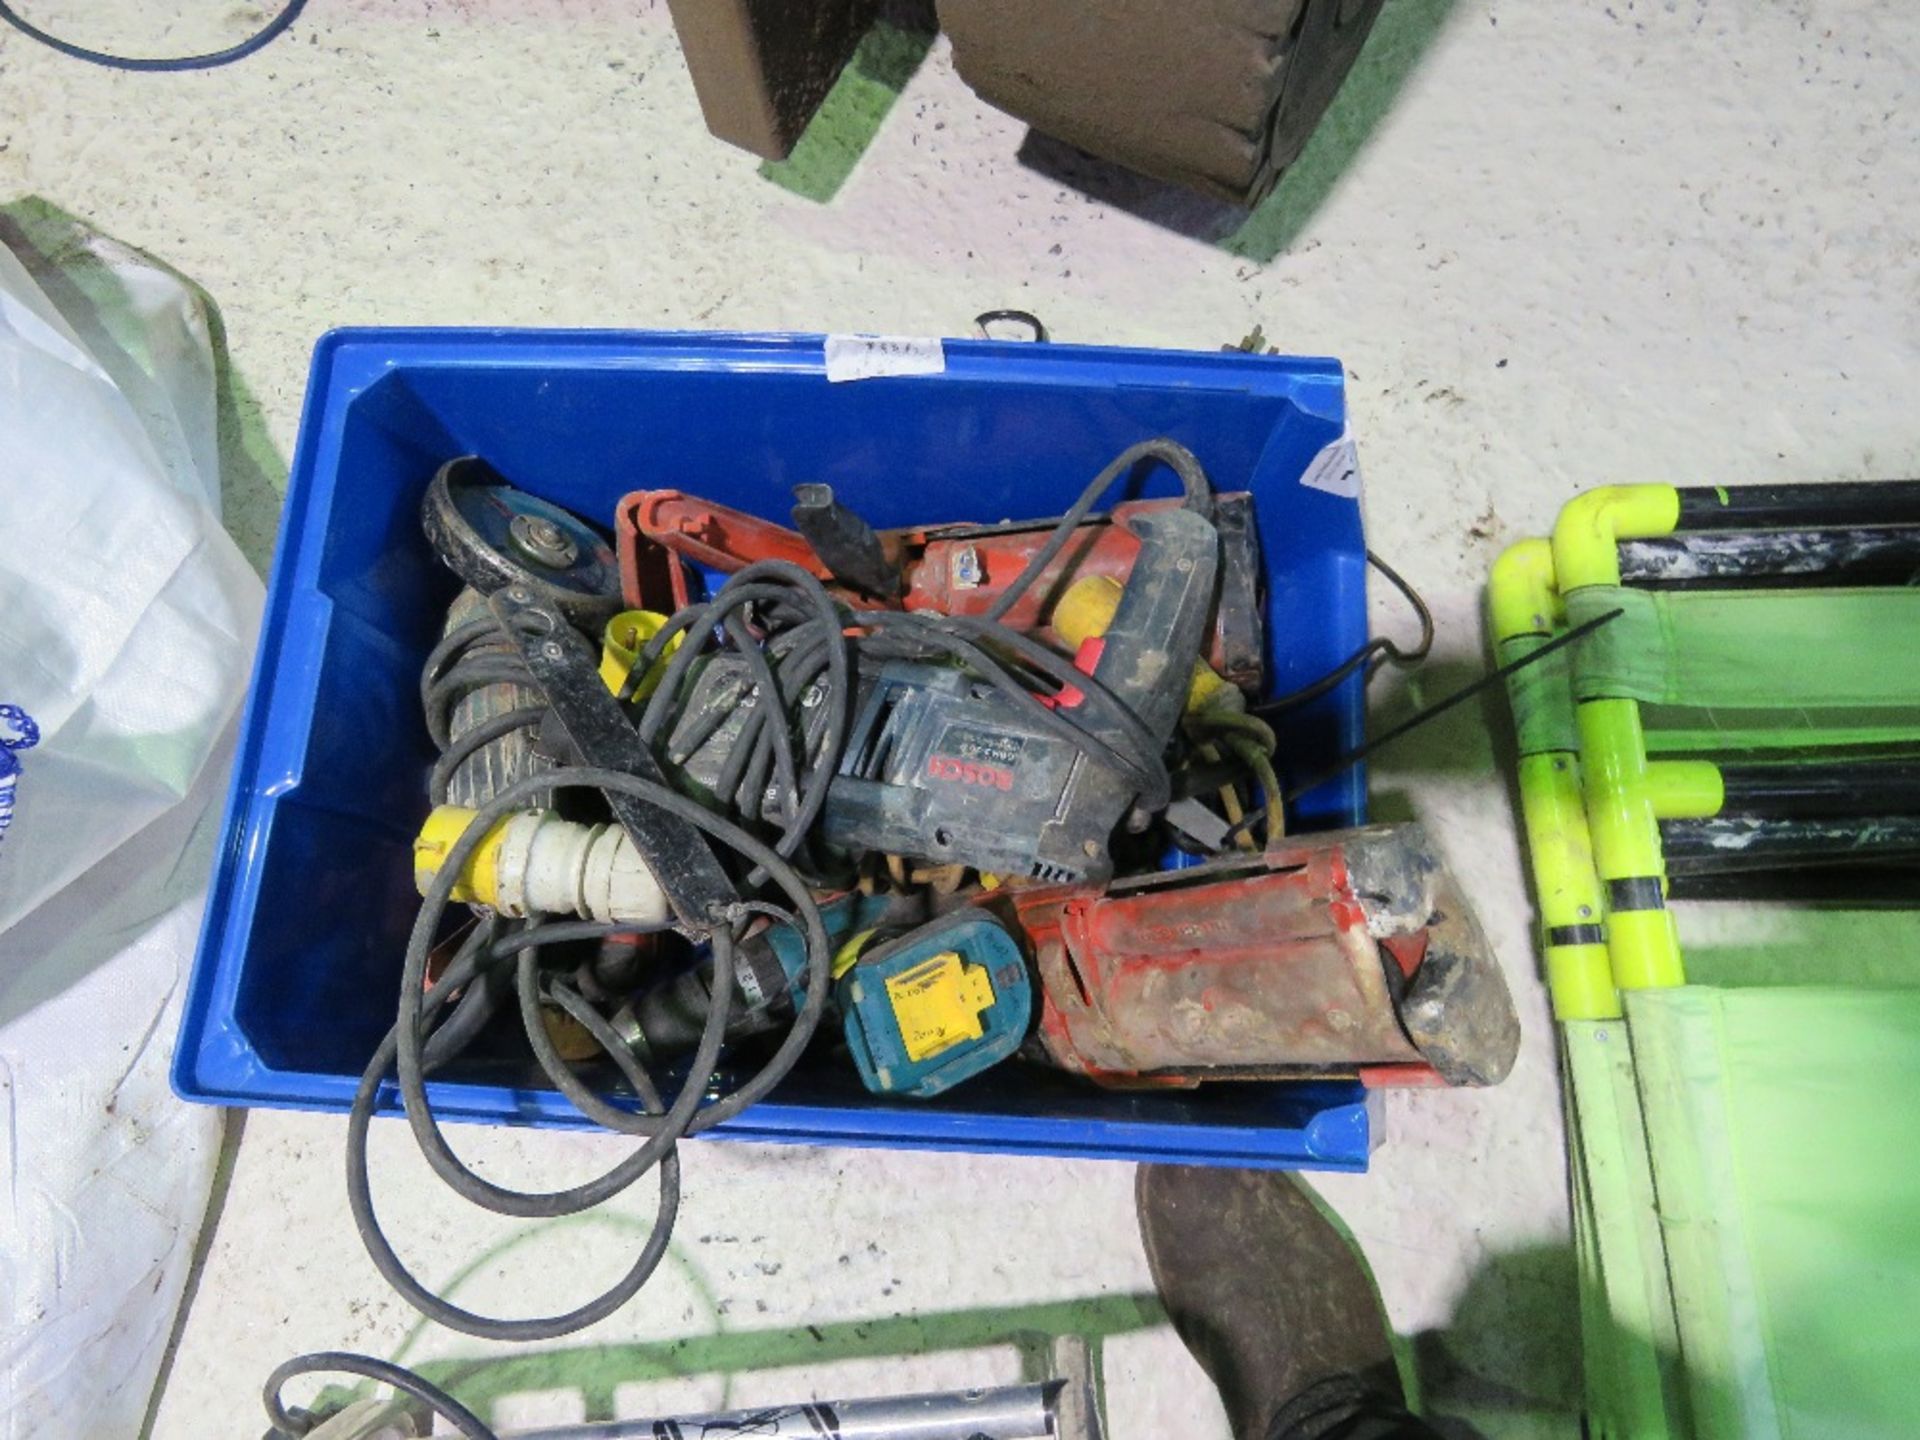 4 X HILTI MASTIC GUNS PLUS POWER TOOLS. SOURCED FROM COMPANY LIQUIDATION. THIS LOT IS SOLD UNDER - Image 7 of 7